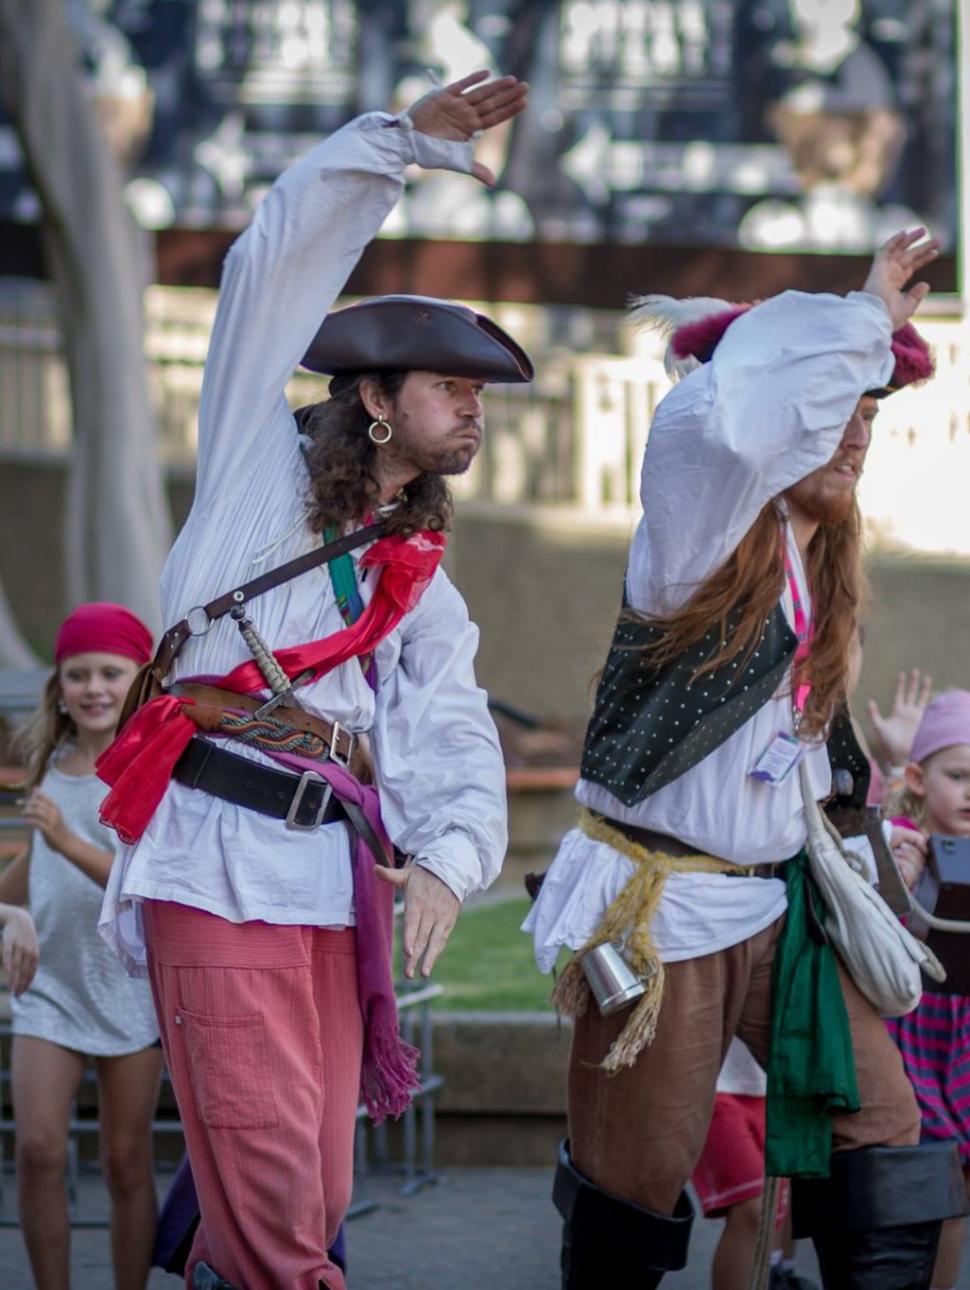 two pirates pretend they are swimming with a group of children dressed as crew members carrying treasure